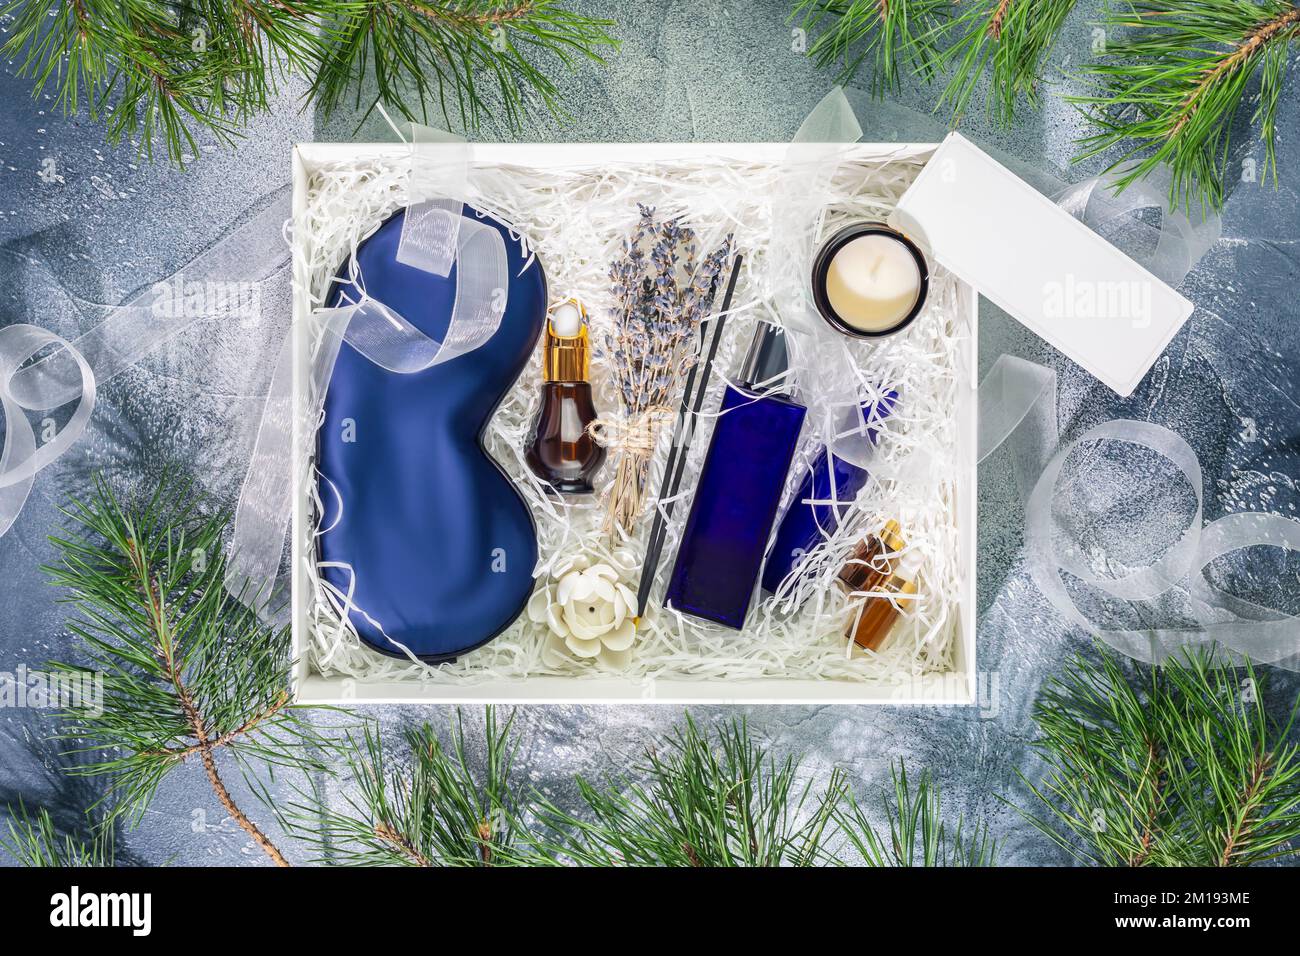 Men winter holidays gift box. Christmas or New Year White gift box with sleep care set for men. Preparing self care package, craft gift box with mask Stock Photo